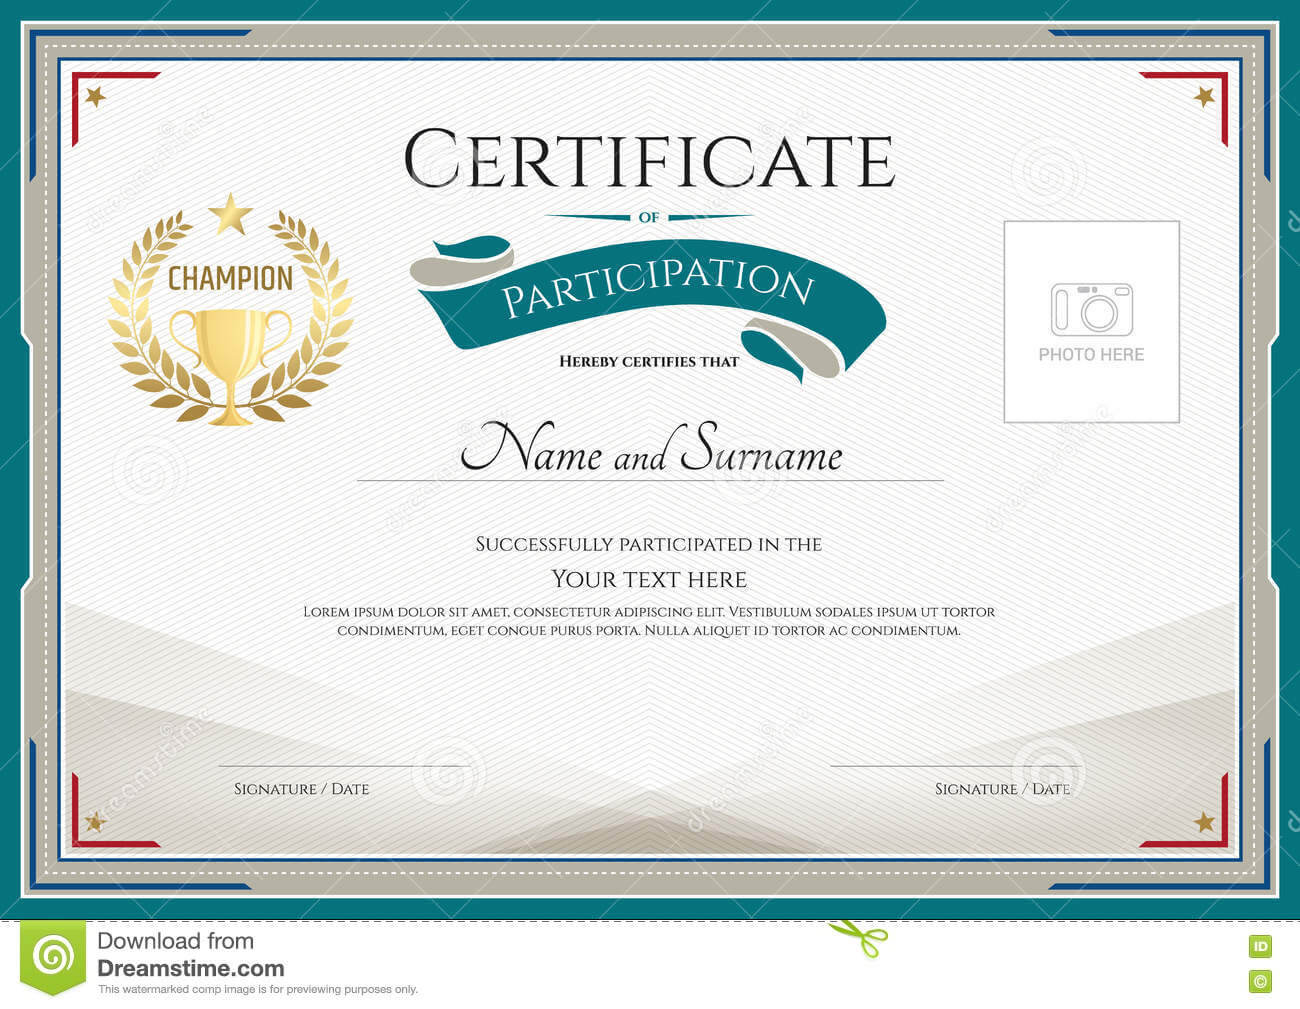 Participation Certificate Templates Free Download – Bolan With Regard To Certificate Of Participation Template Word